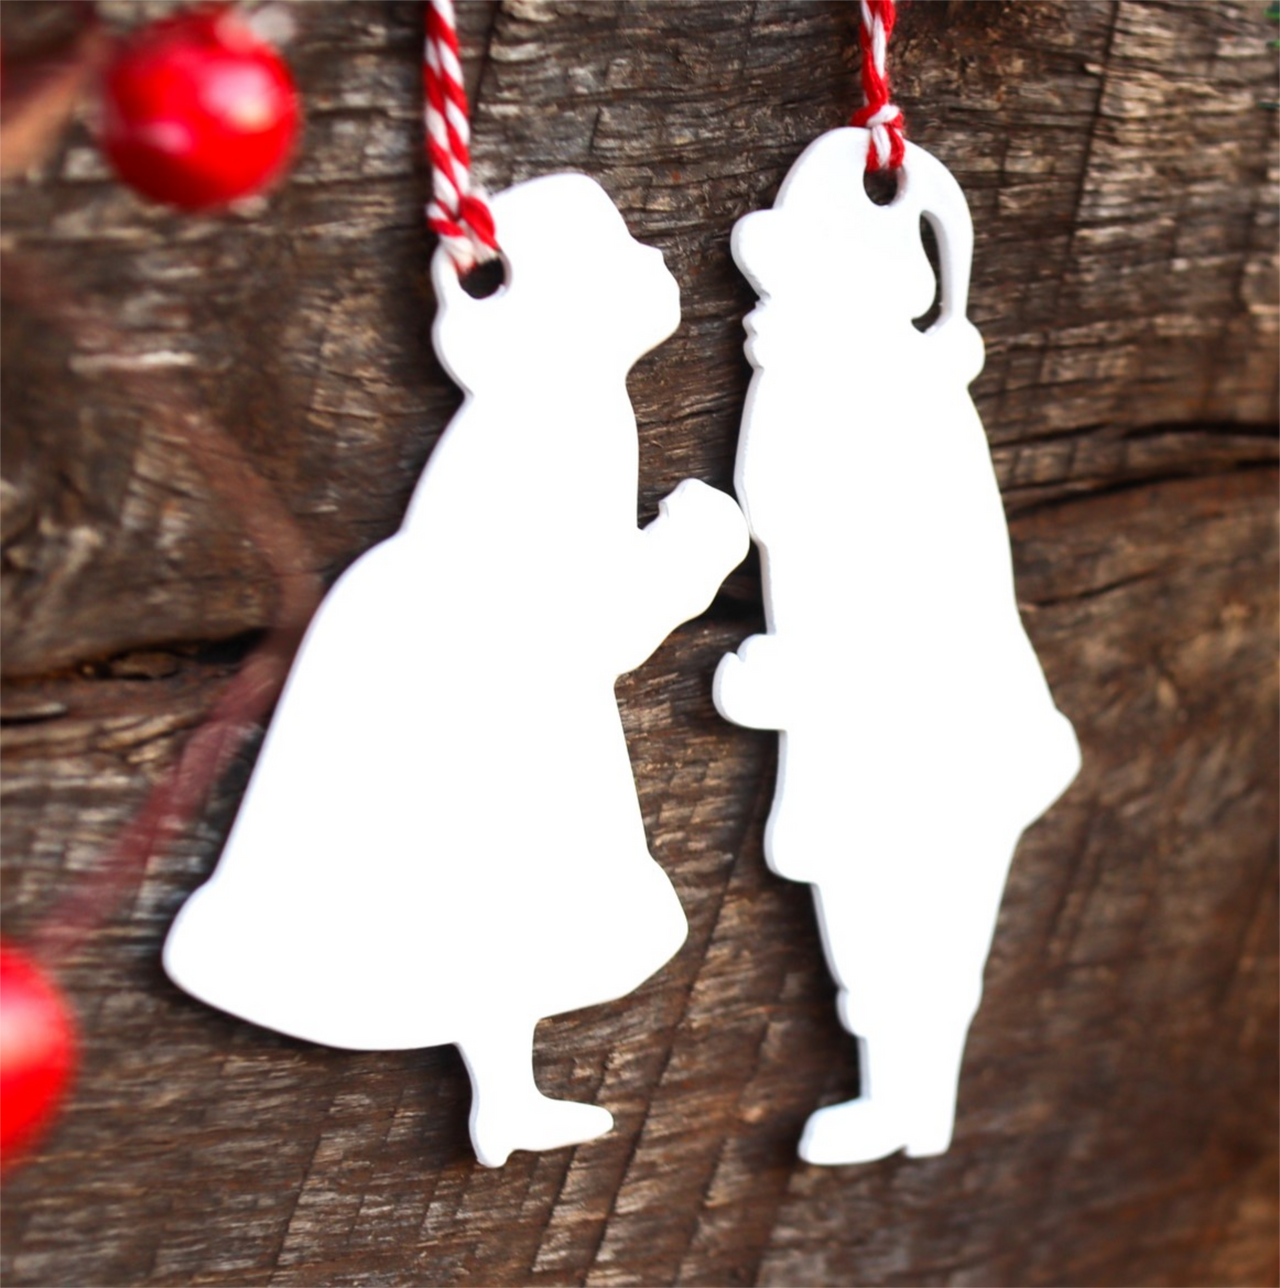 Mr. & Mrs. Claus Christmas Ornament - Holiday Stocking Stuffer Gift - Tree Home Decor